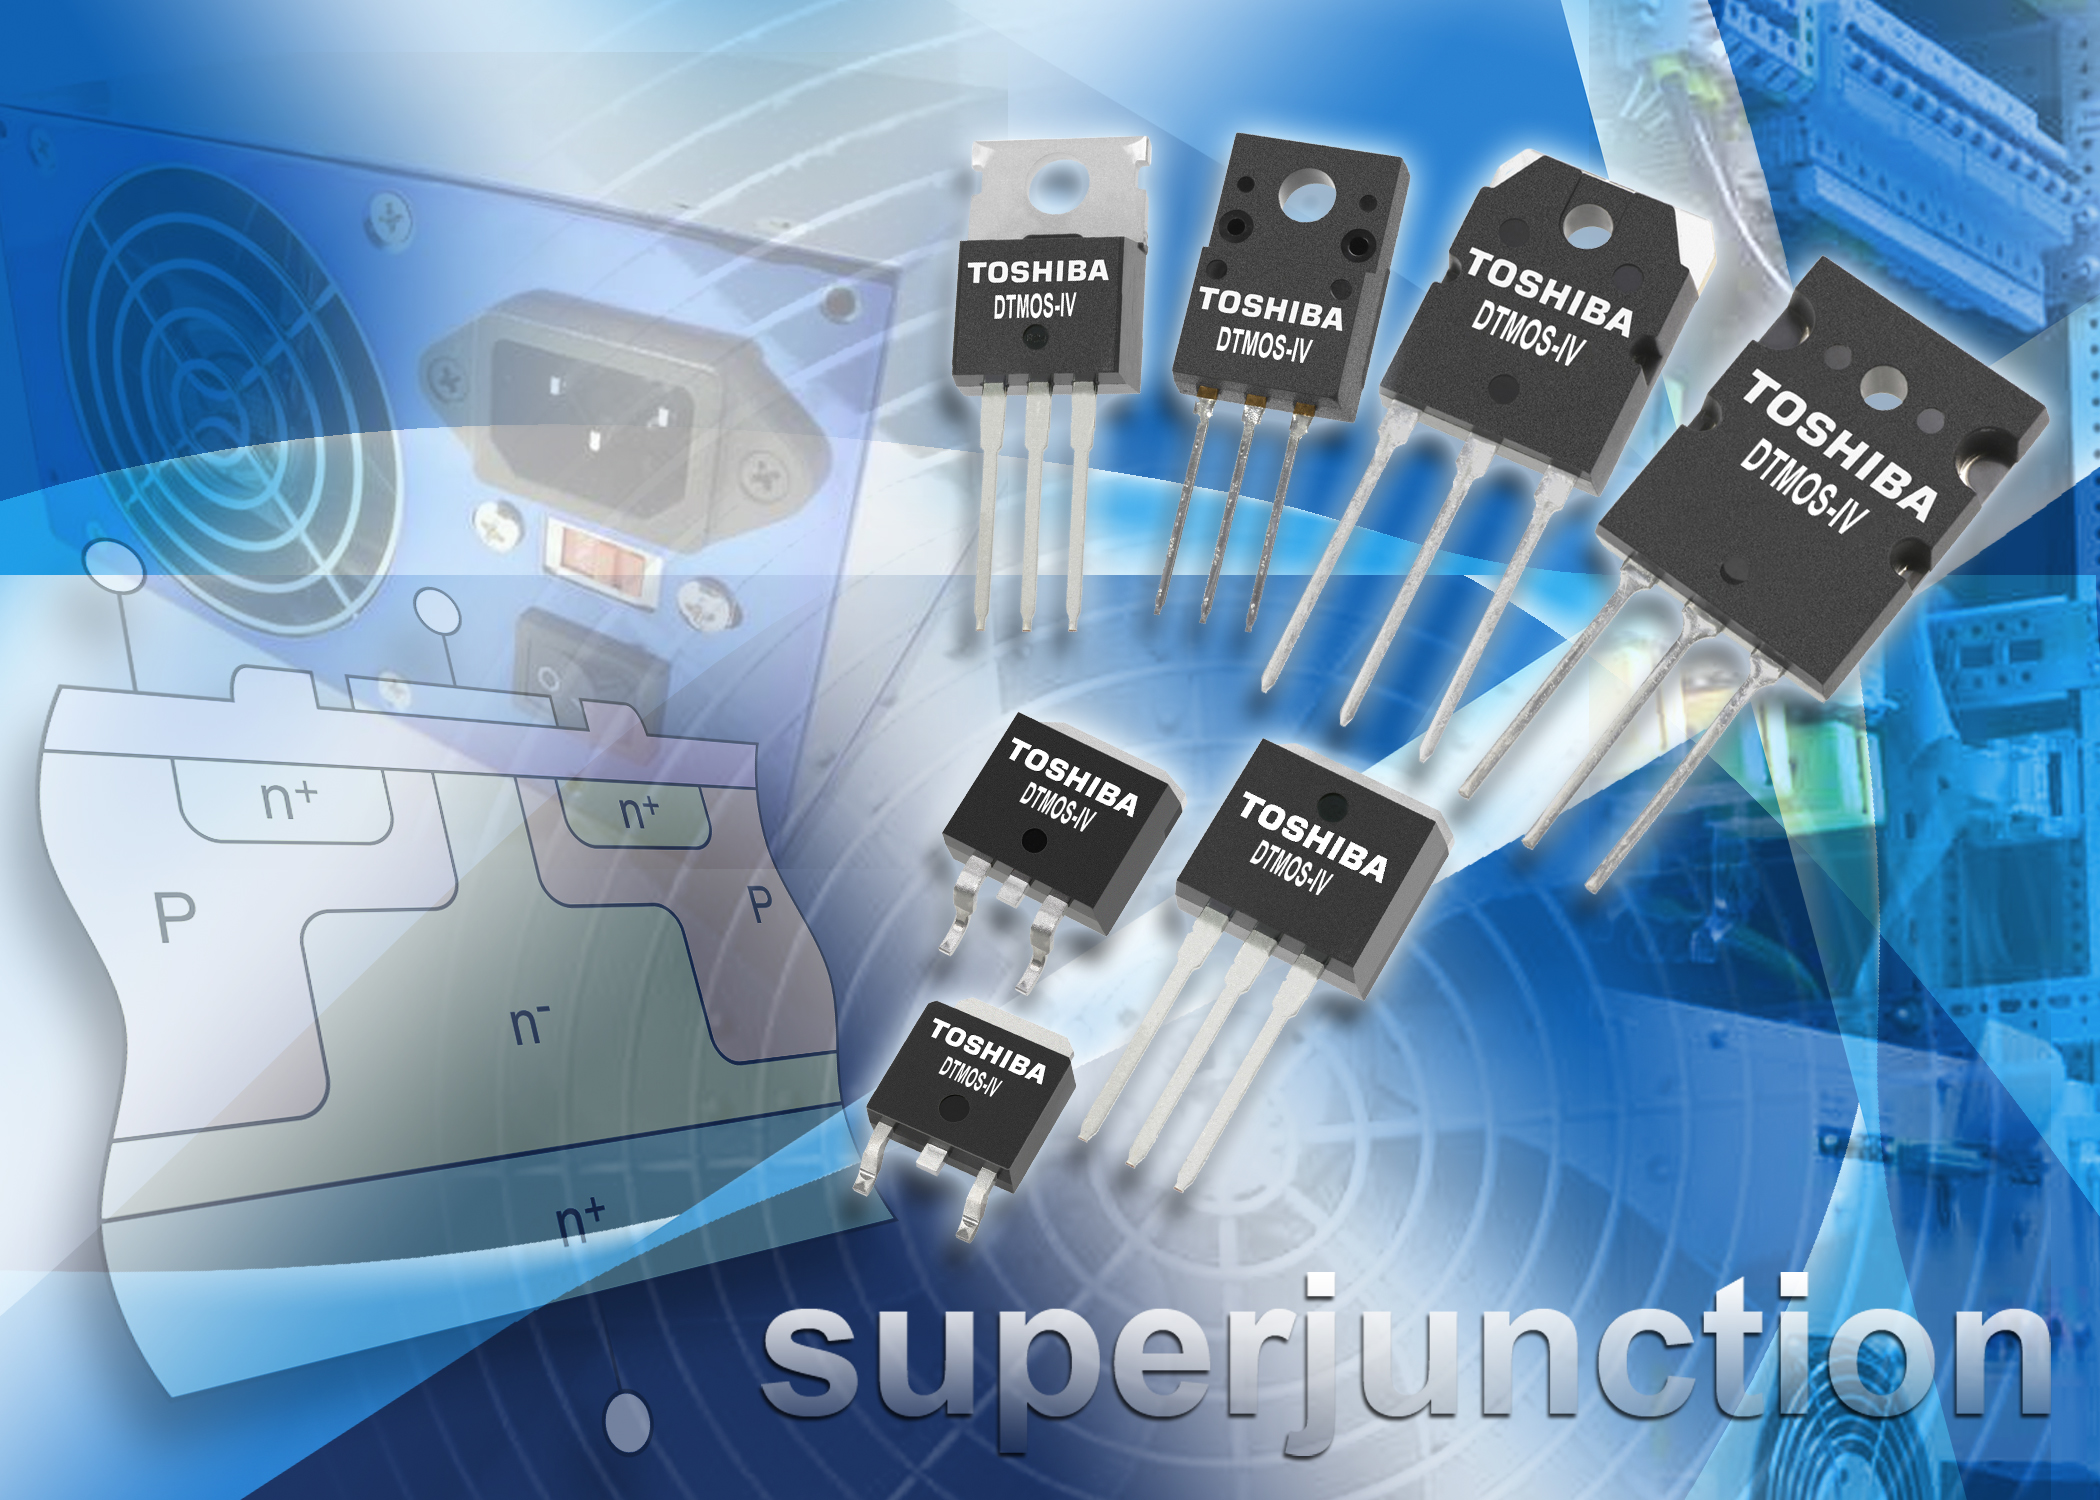 Toshiba Announces Next-Generation Superjunction, Deep Trench Process Power MOSFETs